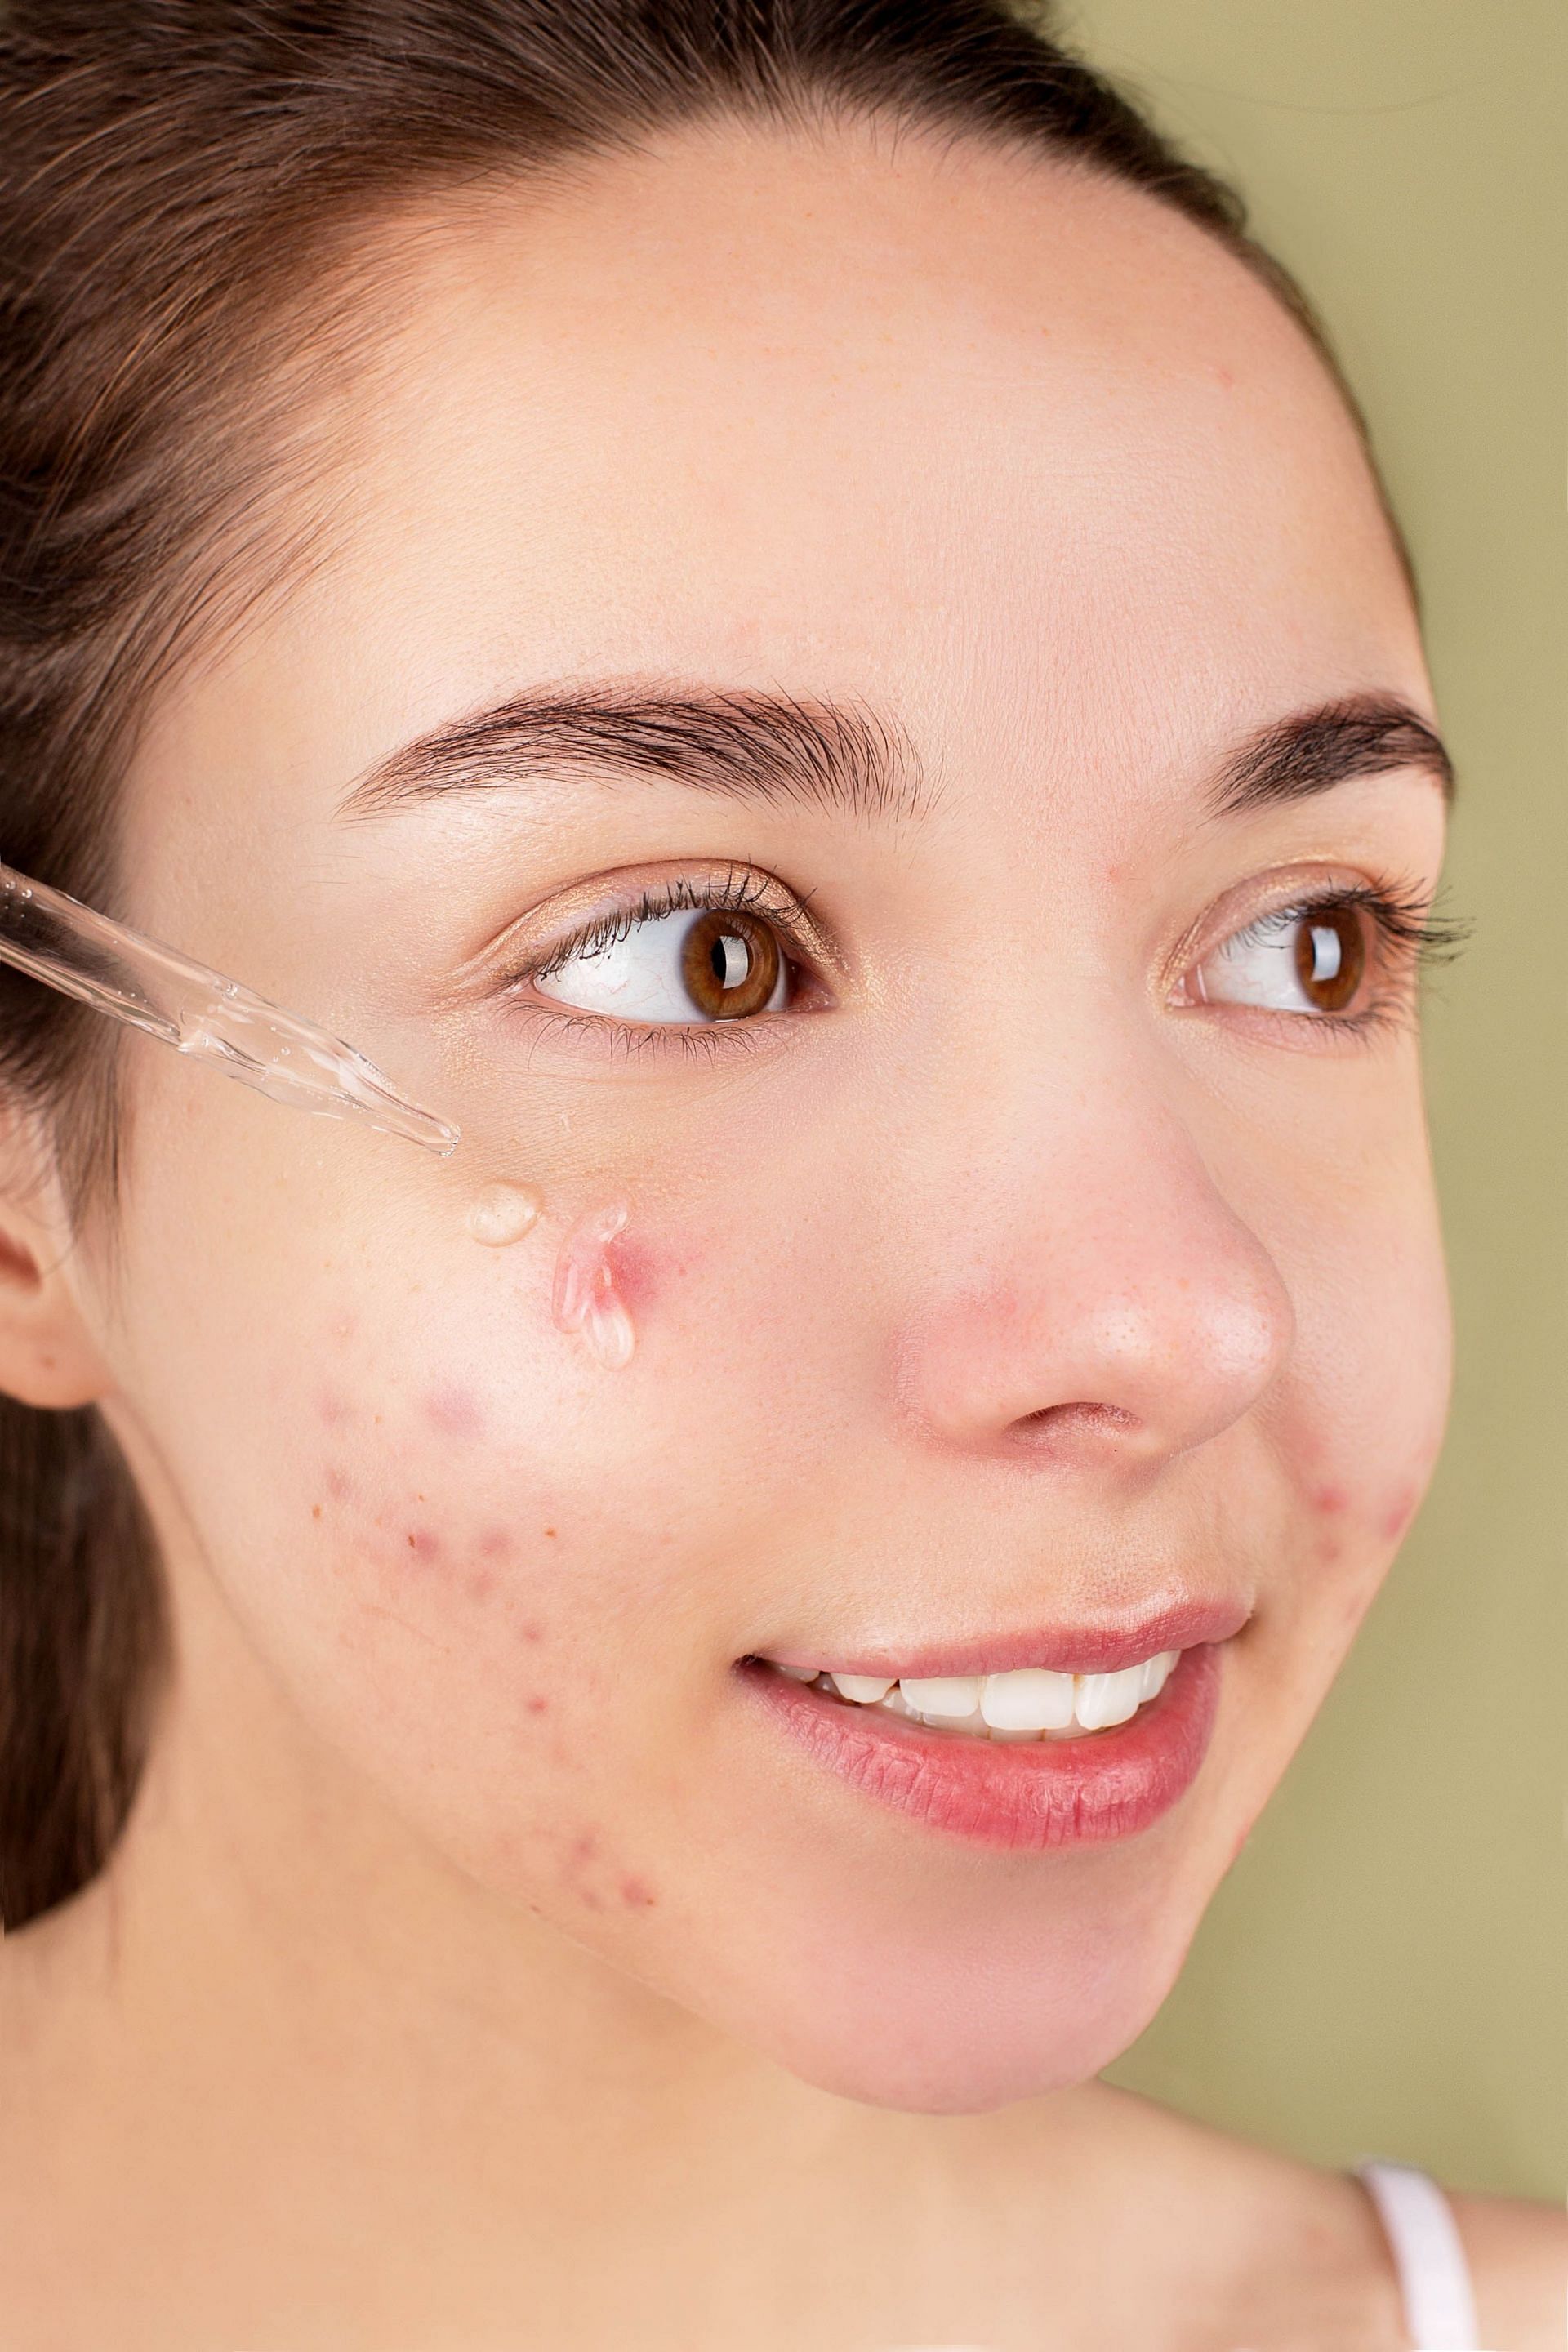 There are many ways to get rid of blackheads (image via Pexels)